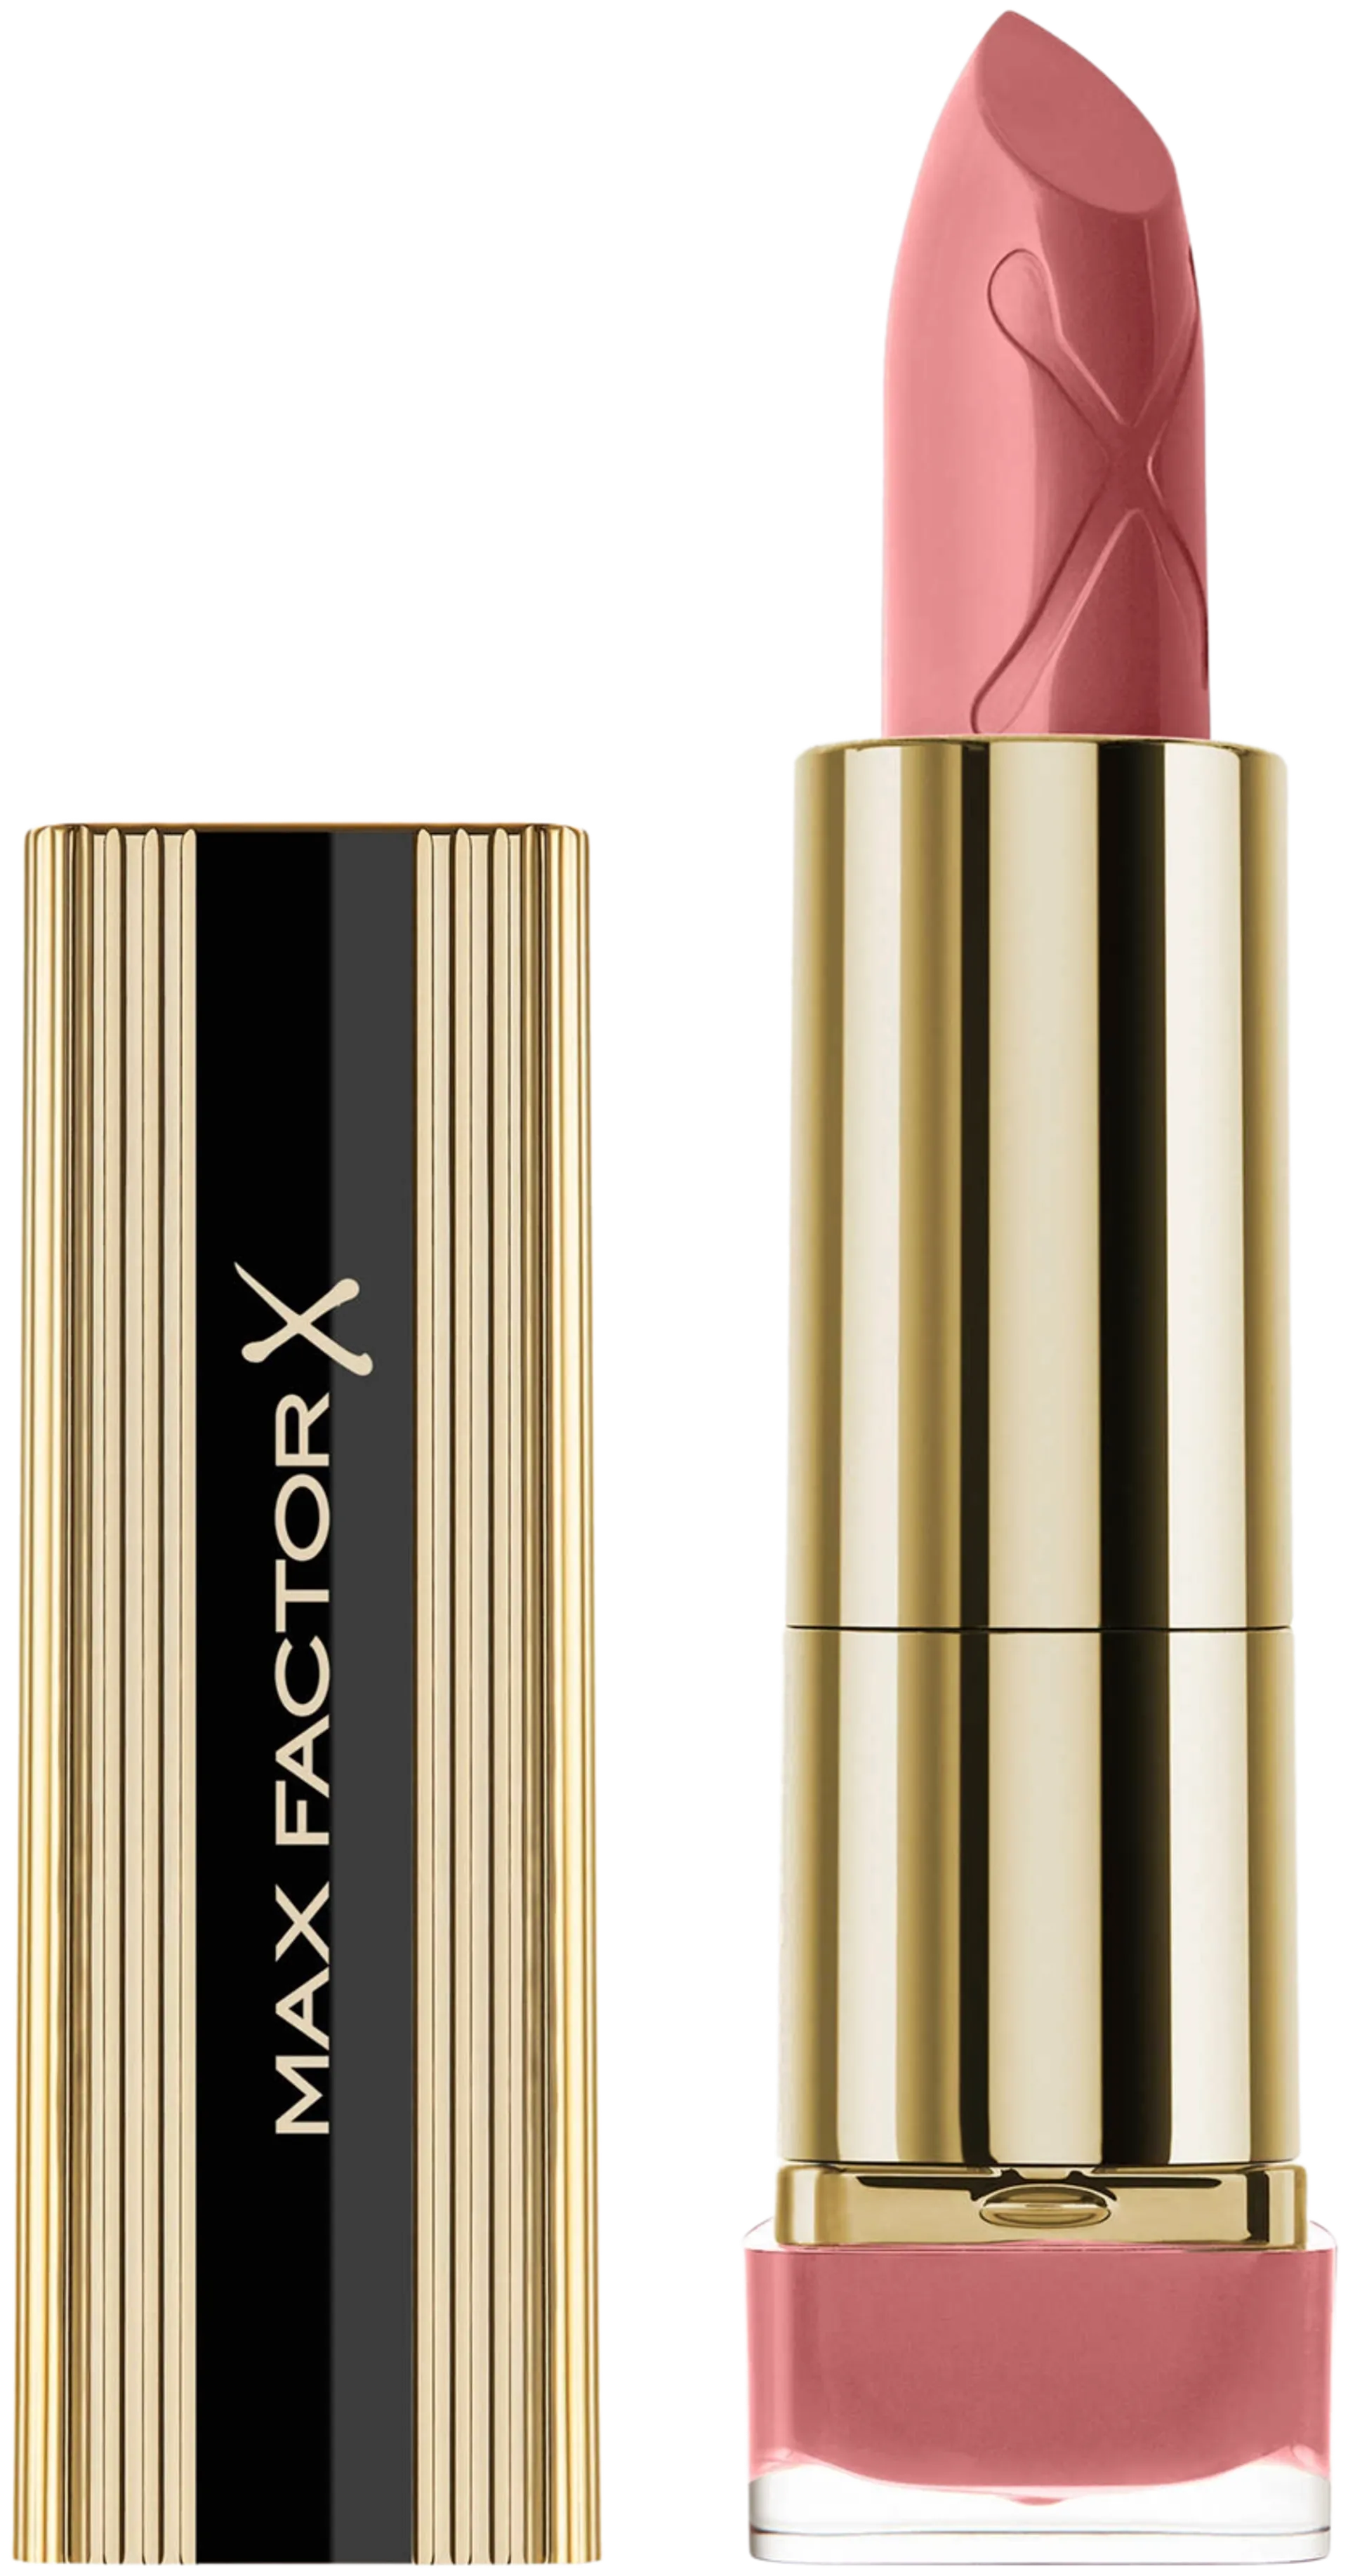 Max Factor Colour Elixir huulipuna 4 g, 010 Toasted Almond - 1